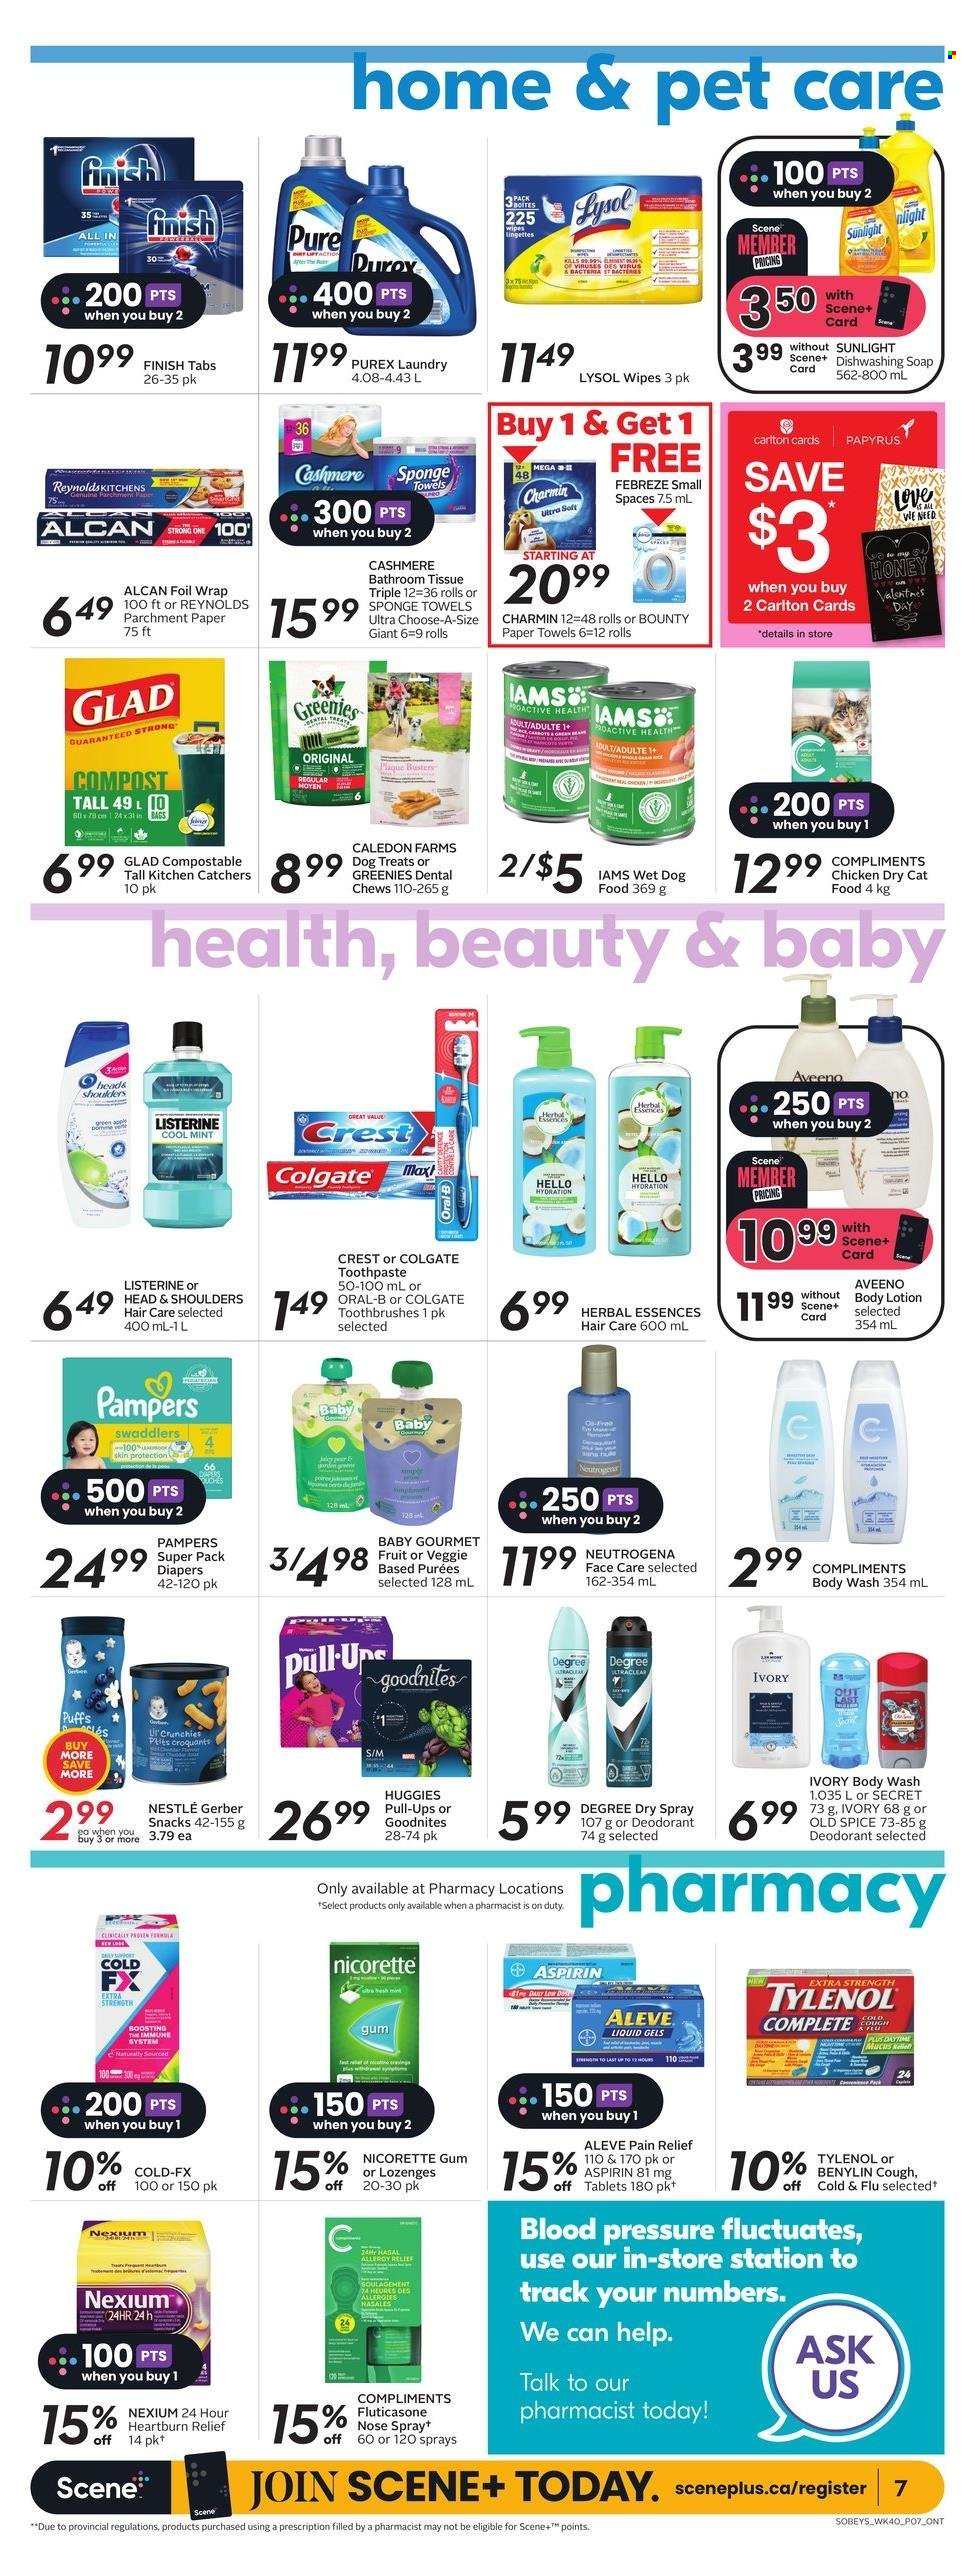 thumbnail - Sobeys Flyer - February 02, 2023 - February 08, 2023 - Sales products - puffs, snack, Bounty, chewing gum, Gerber, spice, honey, wipes, Pampers, nappies, Aveeno, bath tissue, kitchen towels, paper towels, Charmin, Febreze, Lysol, Sunlight, Purex, body wash, soap, toothpaste, Crest, Head & Shoulders, Herbal Essences, body lotion, anti-perspirant, animal food, Greenies, dental chews, cat food, dog food, wet dog food, dry cat food, Iams, compost, pain relief, Aleve, Cold & Flu, Nicorette, Tylenol, Nexium, Nicorette Gum, aspirin, Benylin, Colgate, Listerine, Nestlé, Neutrogena, Huggies, Old Spice, Oral-B, deodorant. Page 8.